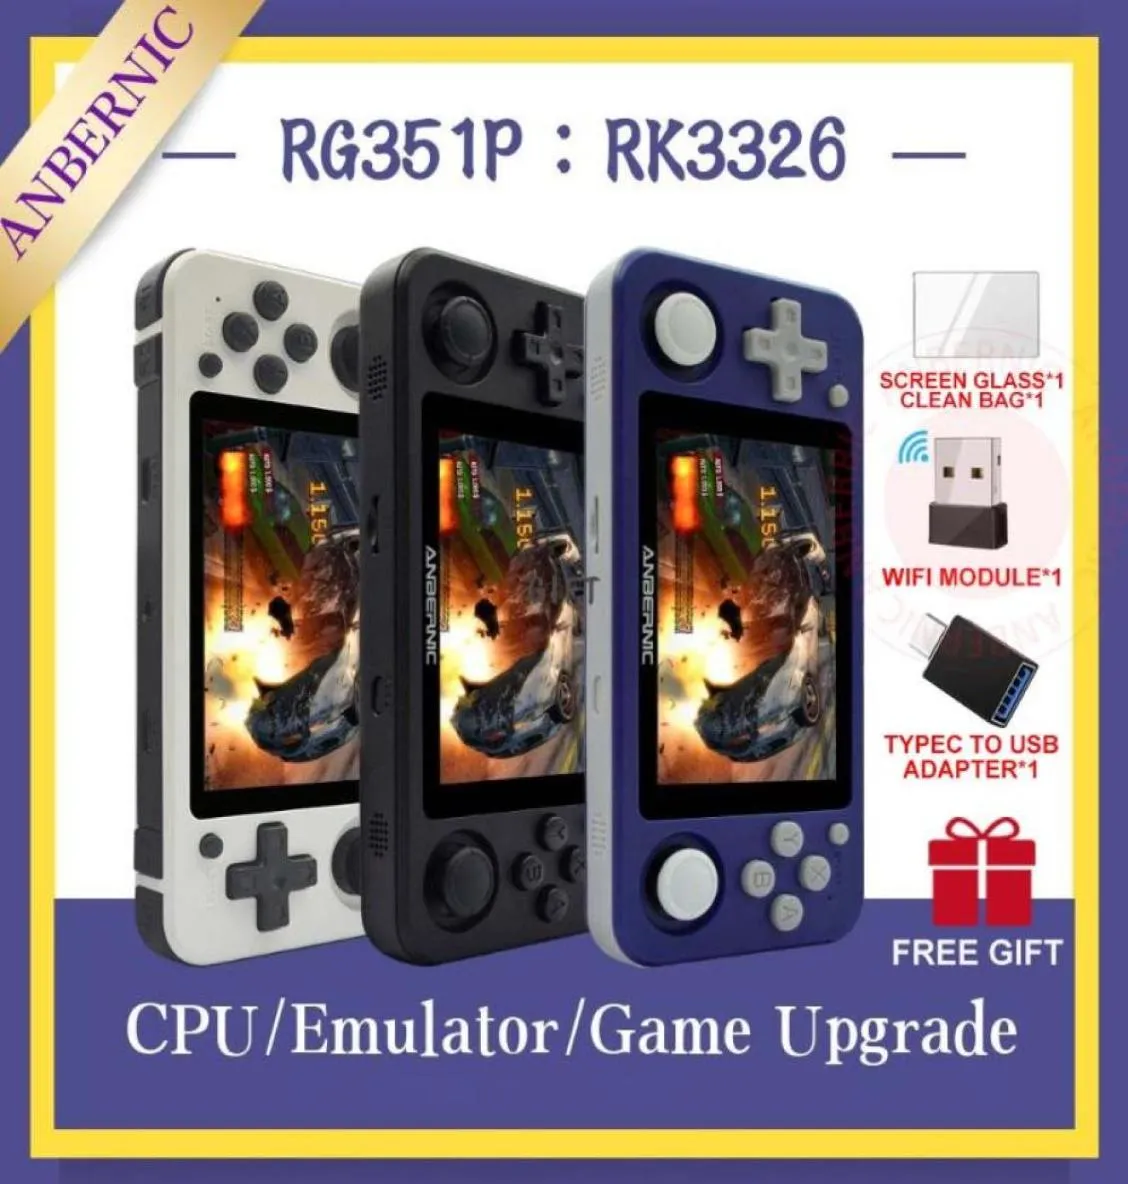 Portable Game Players RG351P ANBERNIC Retro Console RK3326 Linux System PC Shell PS1 Player Pocket RG351 Handheld3643016